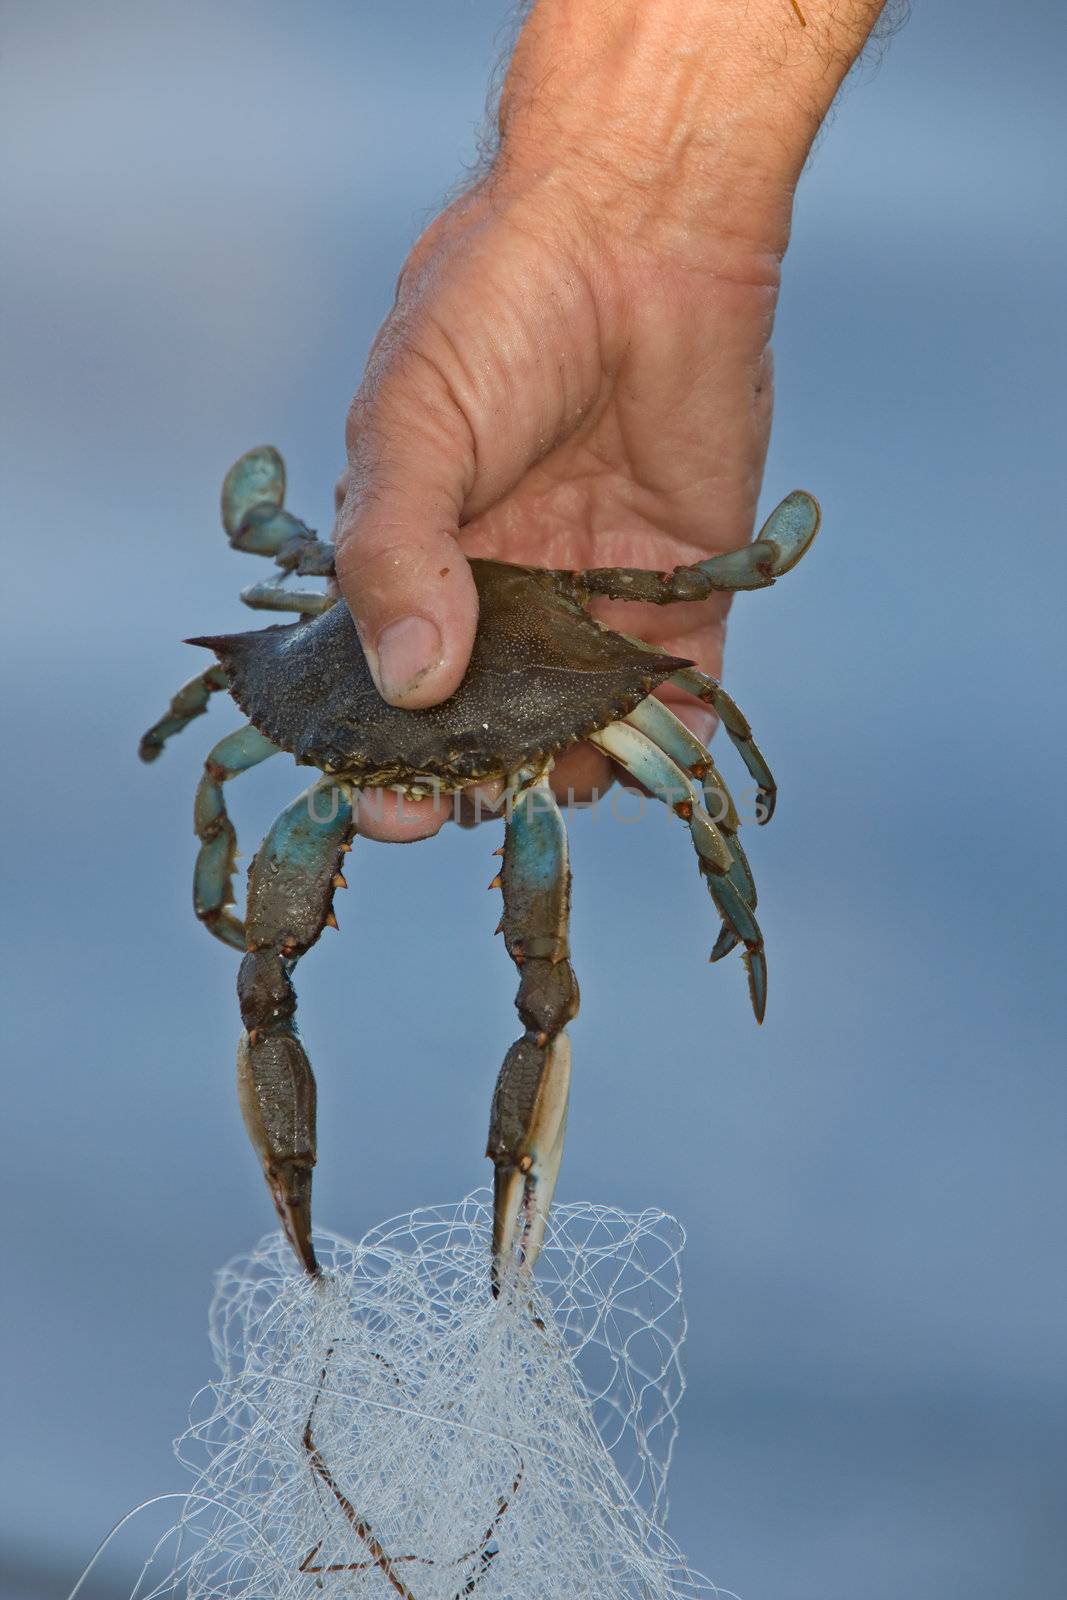 Man holding Blue Crab in Florida by pictureguy